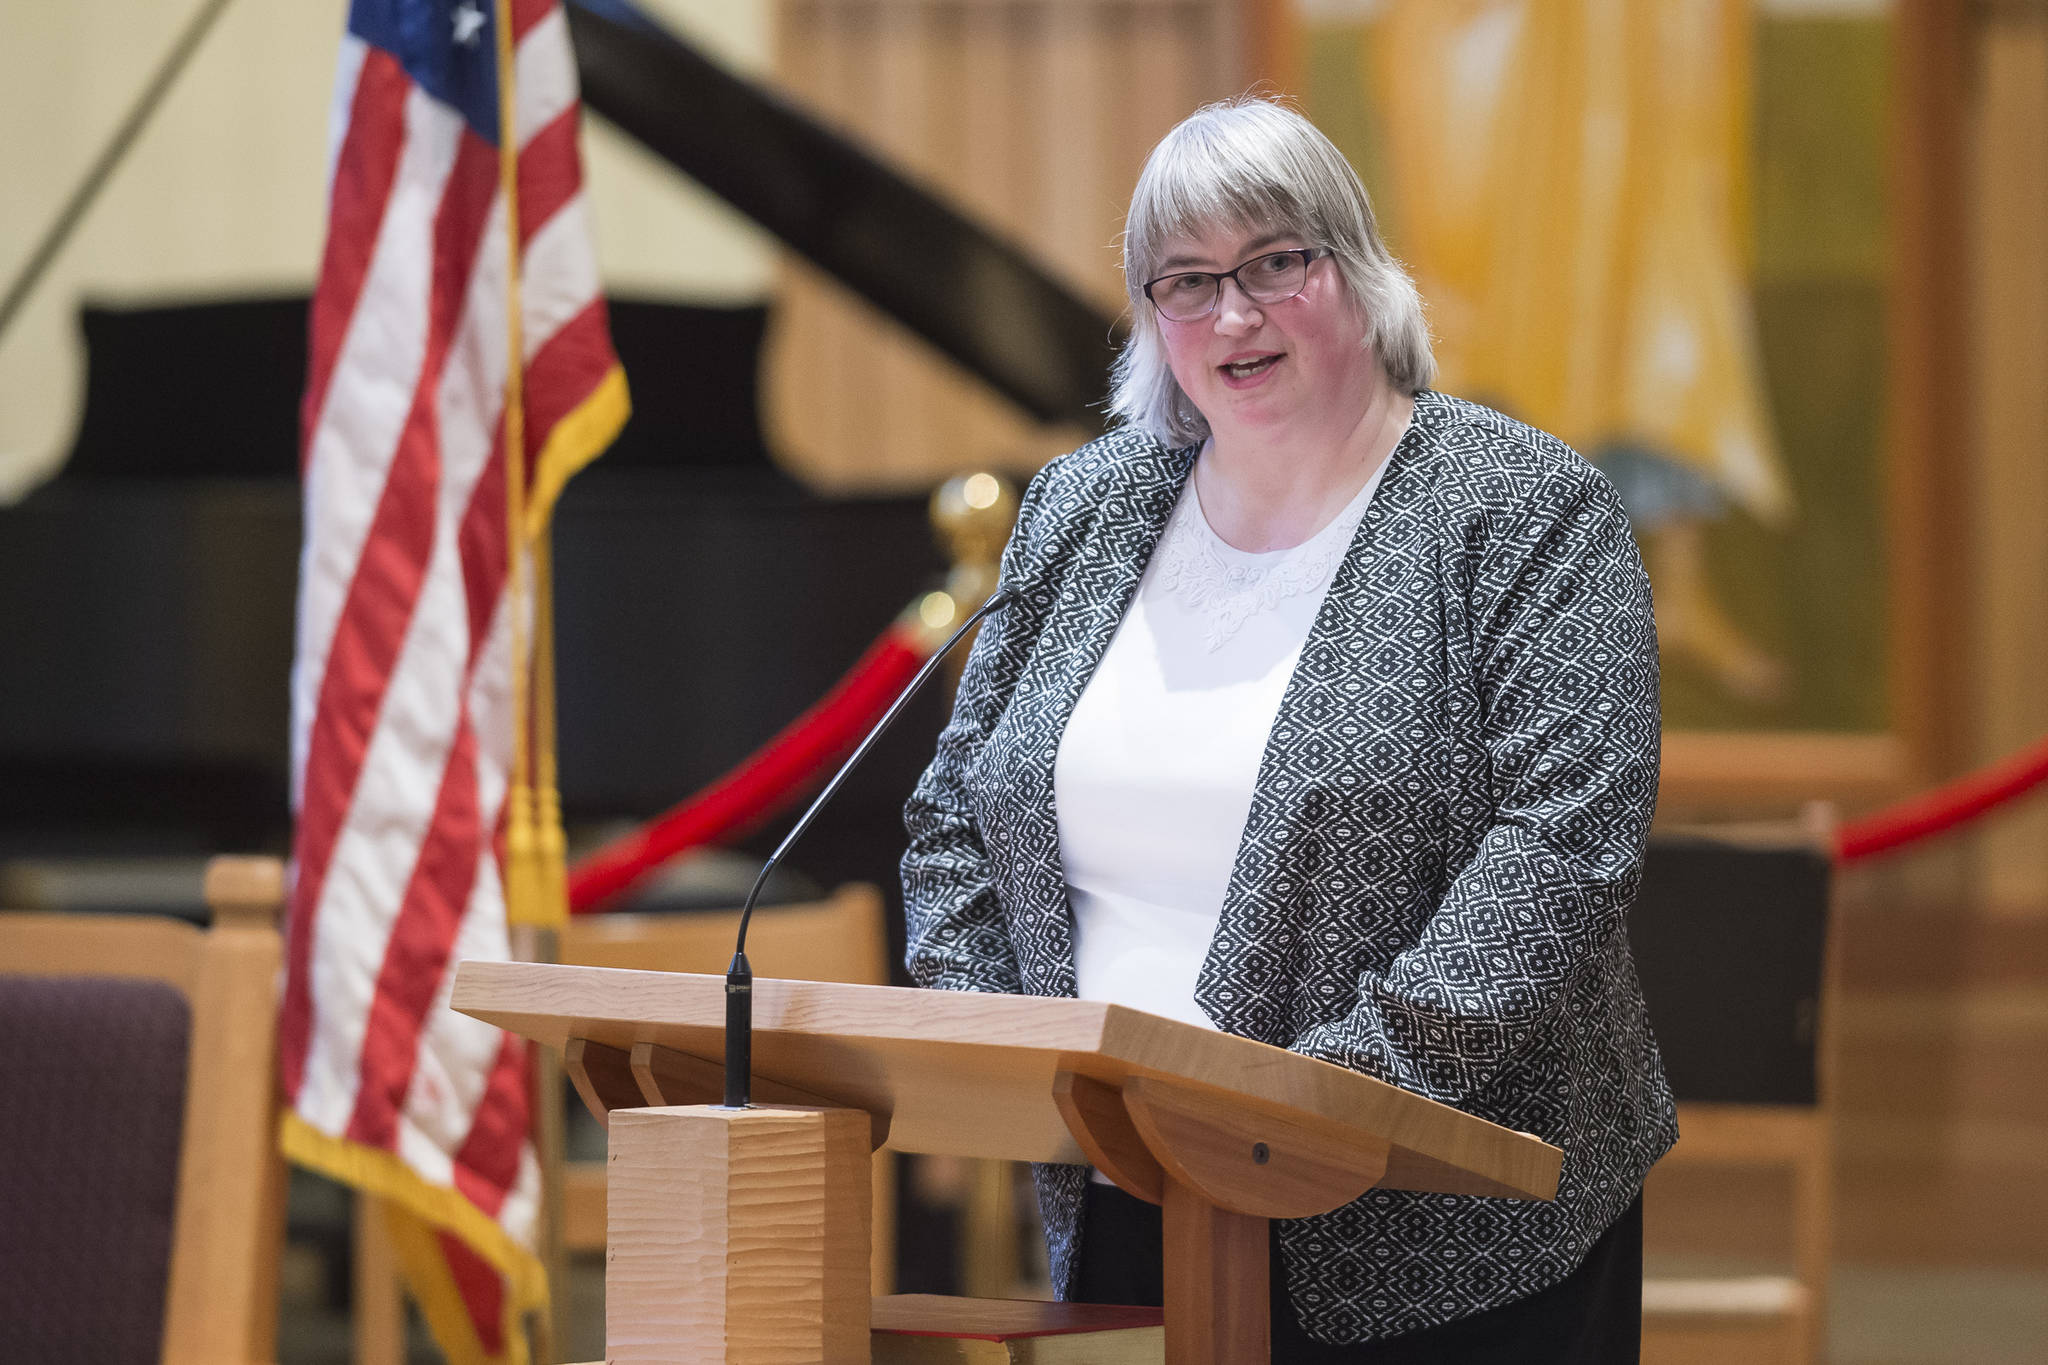 Mayor Beth Weldon speaks at the Dr. Martin Luther King Jr. 2019 Community Celebration at St. Paul’s Catholic Church on Monday, Jan. 21, 2019. On Friday, she announced that she is running for another term as mayor. (Michael Penn /Juneau Empire File)